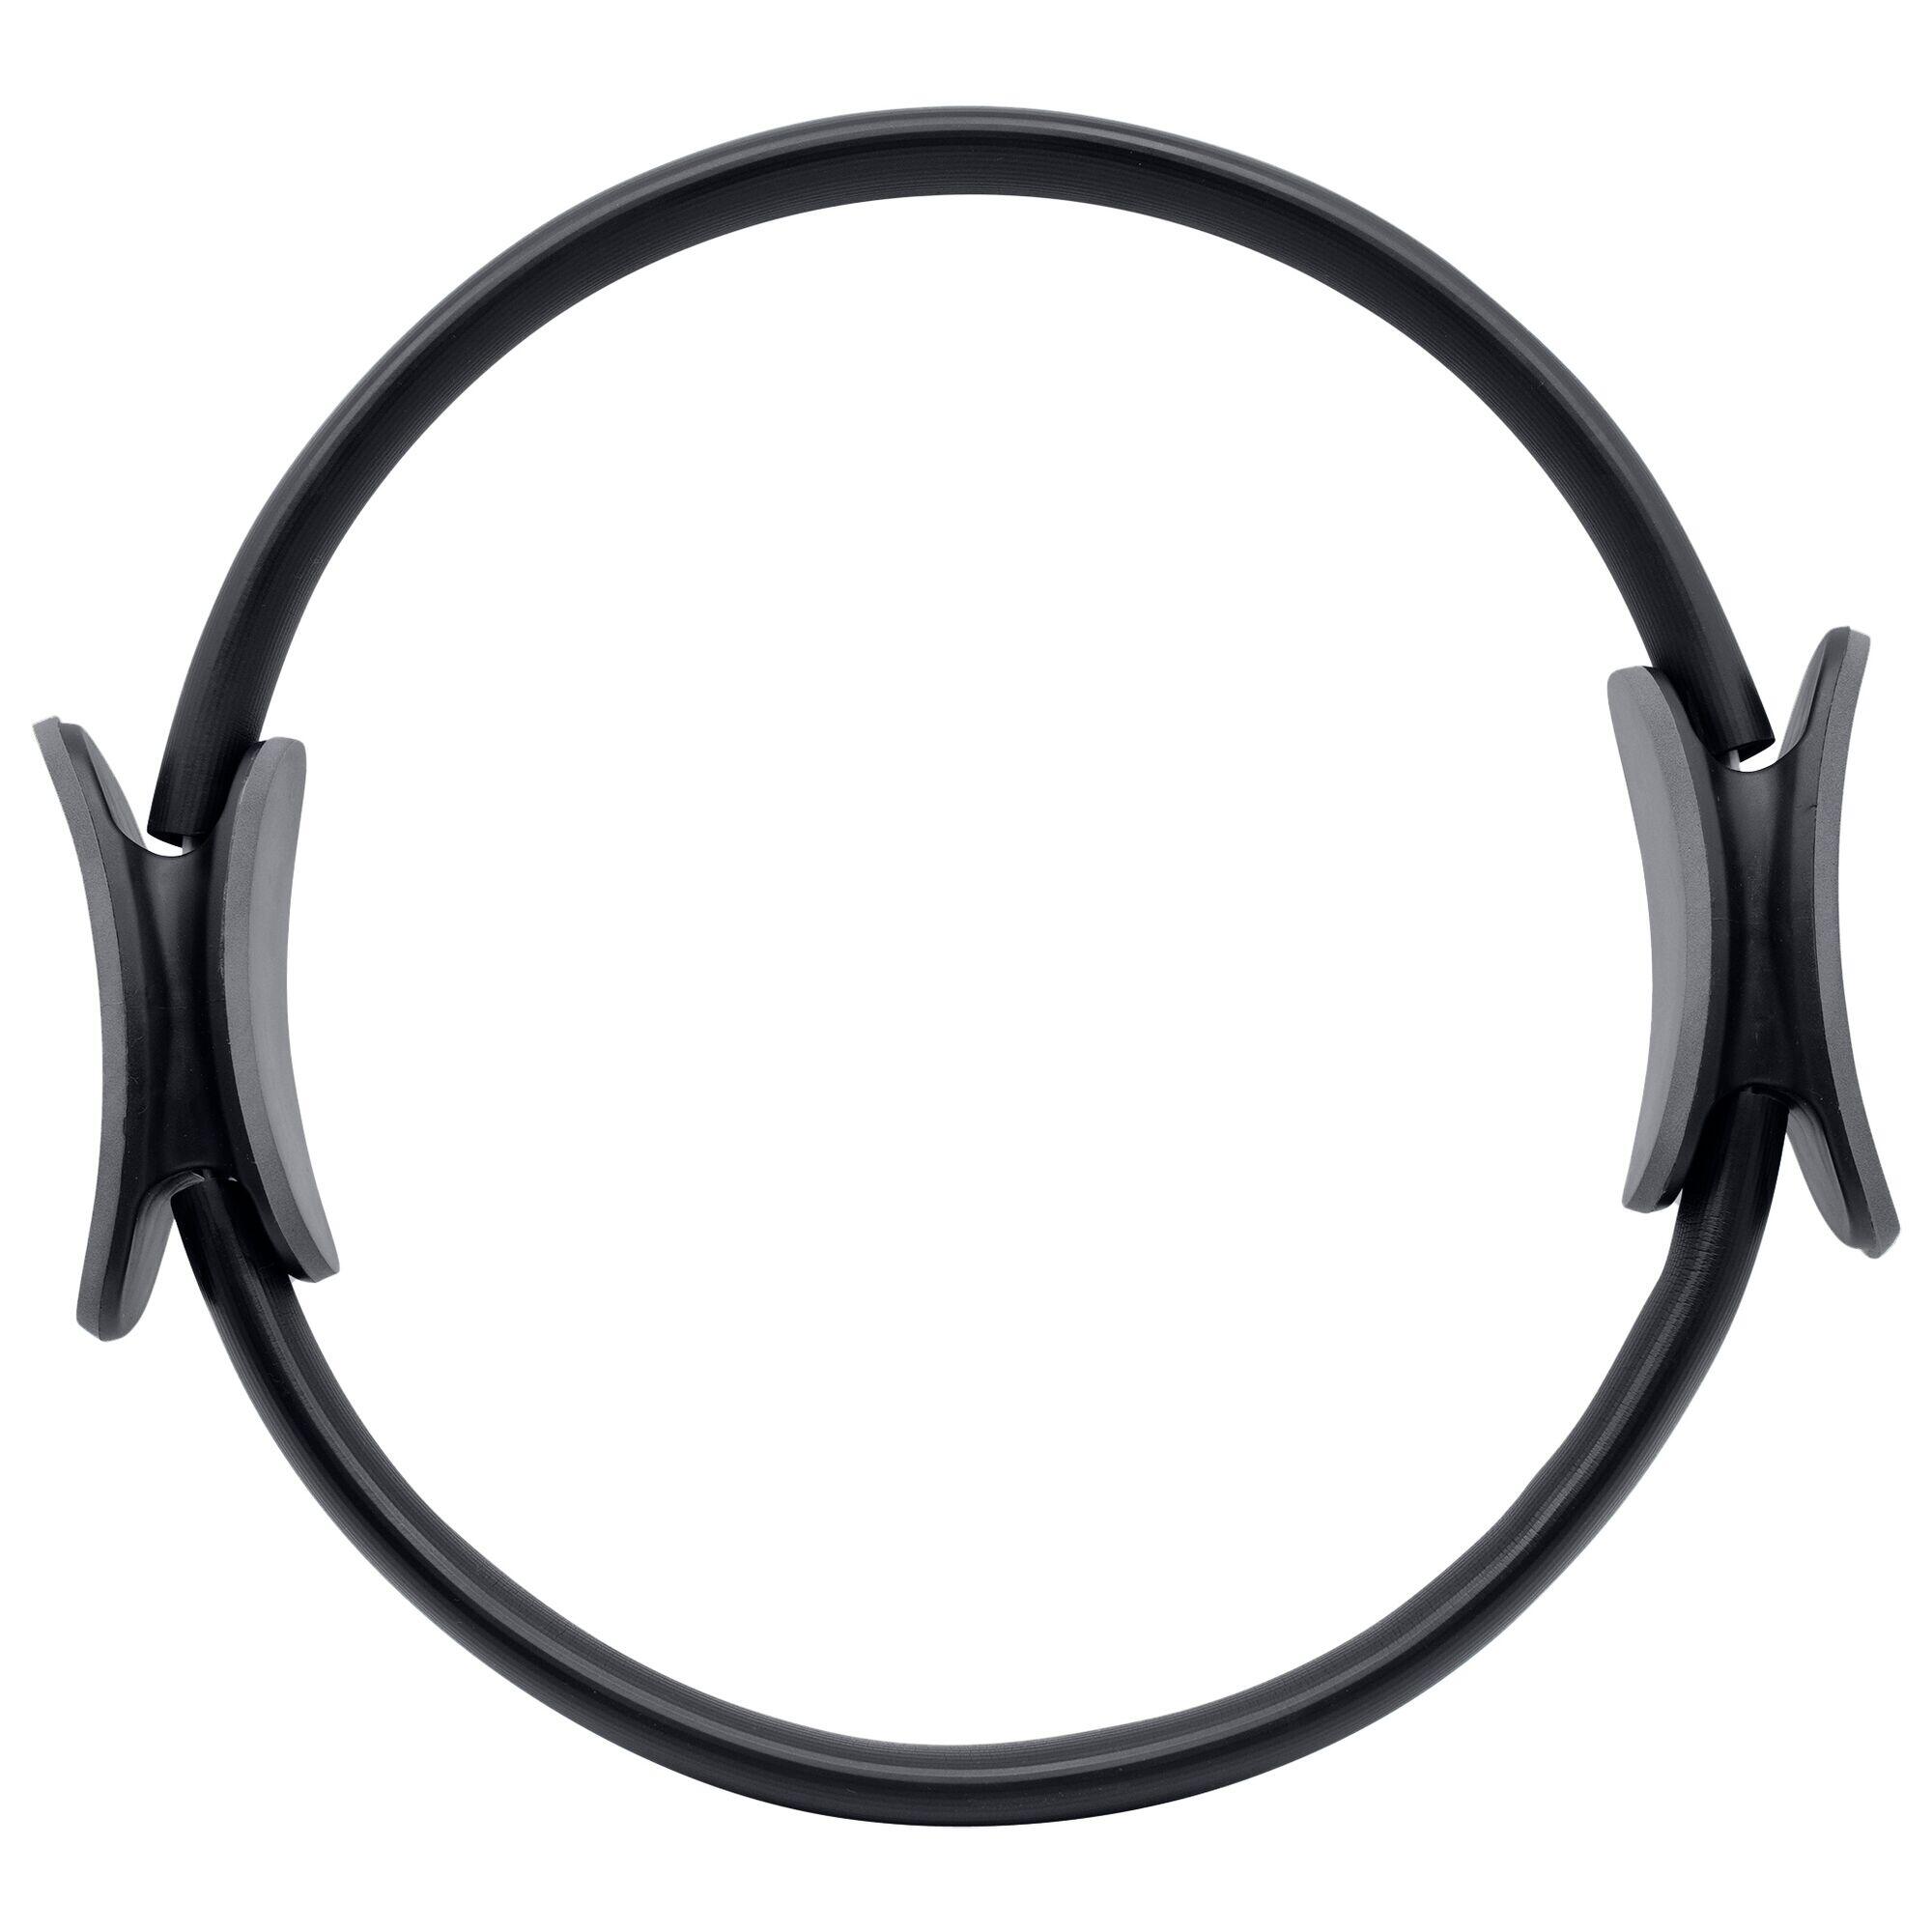 Adults' Home Fitness Pilates Ring - Black 1/3